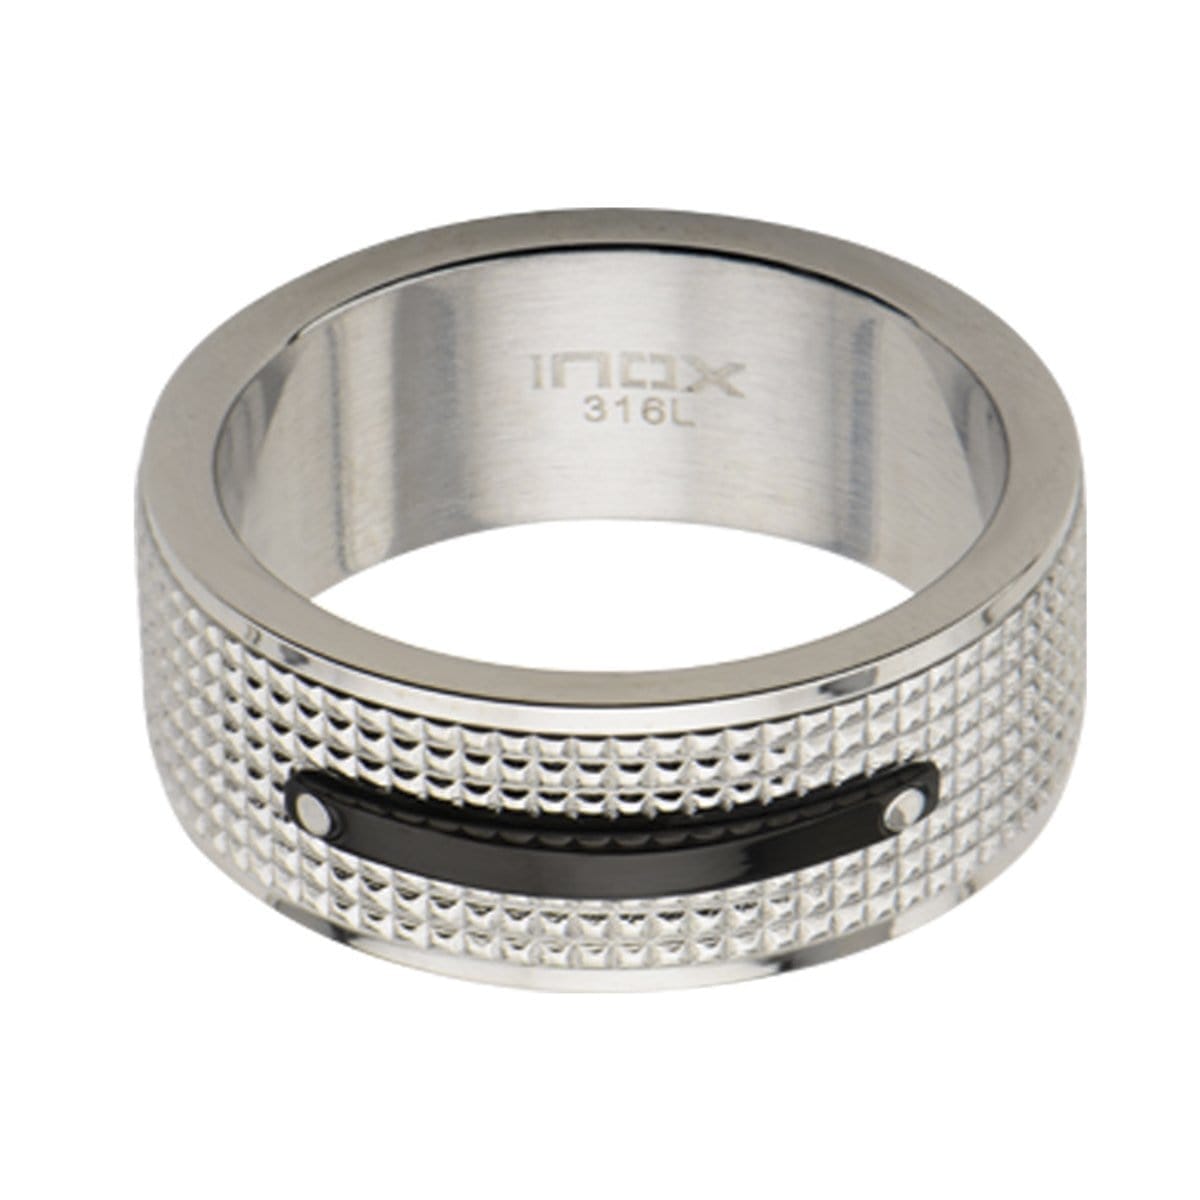 INOX JEWELRY Rings Black and Silver Tone Stainless Steel Checkered Band Ring